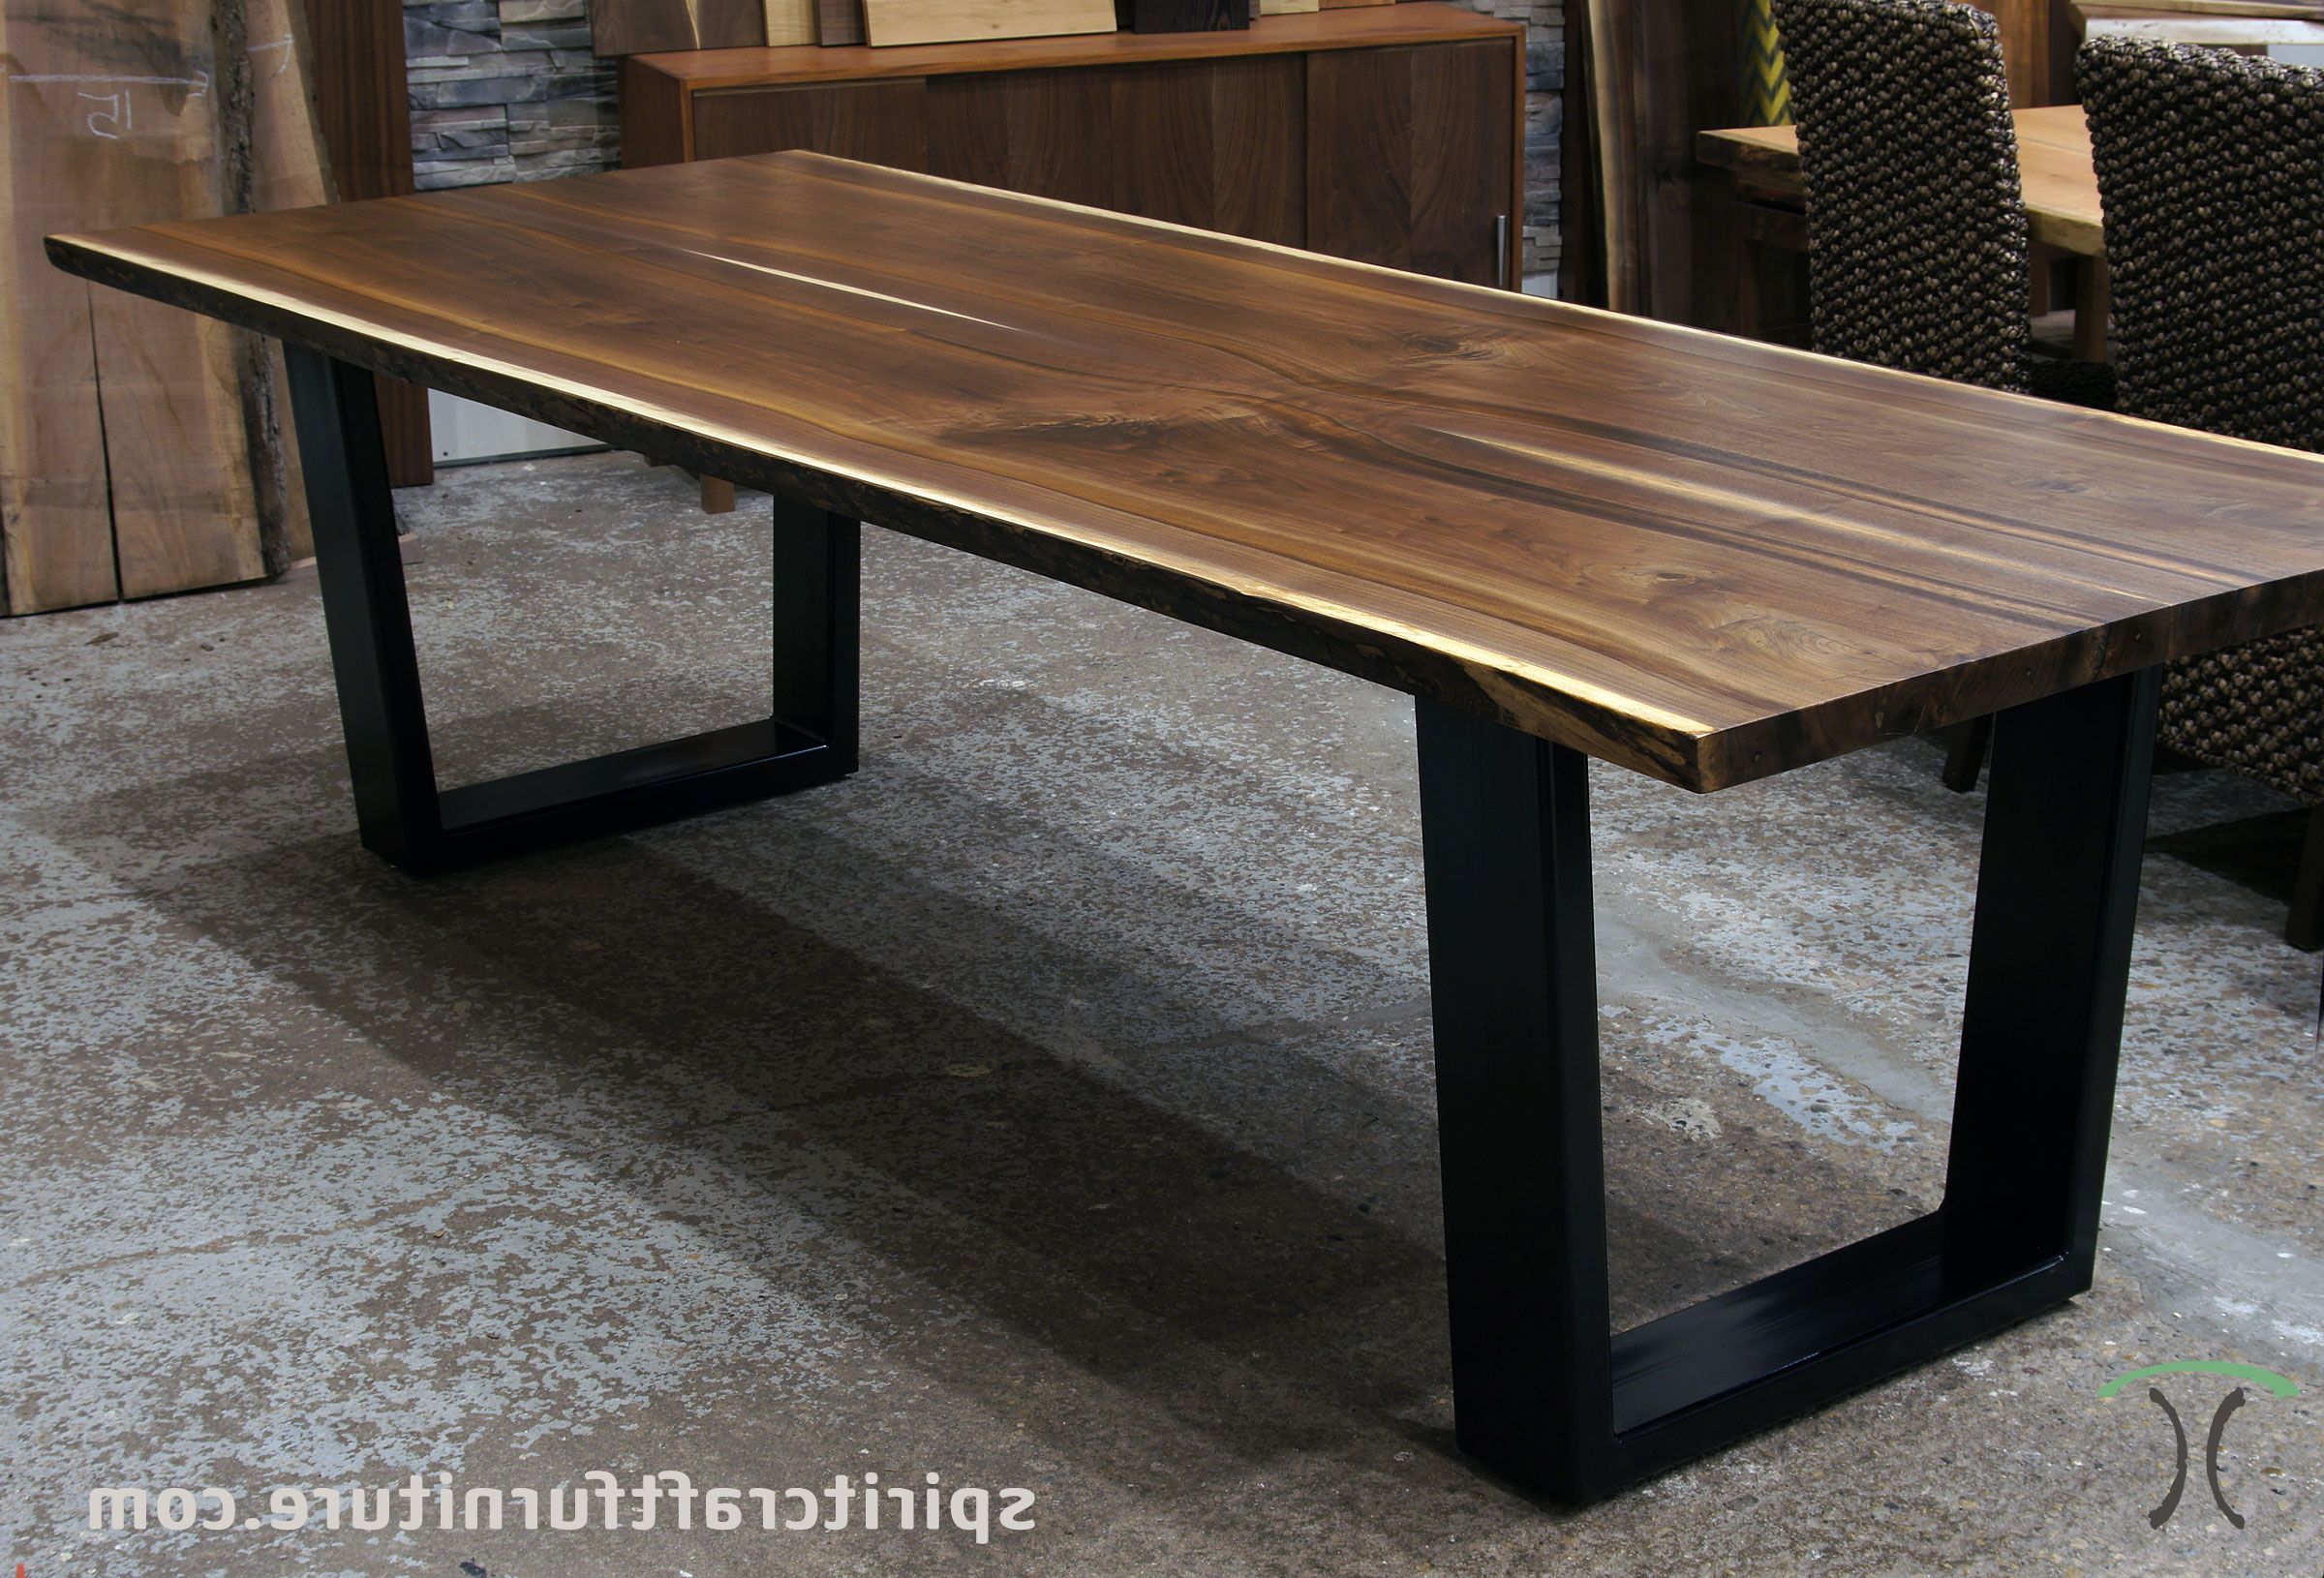 2020 Black And Walnut Dining Tables Intended For Live Edge Slab Dining Tables, Walnut Slabs And Tops (View 16 of 20)